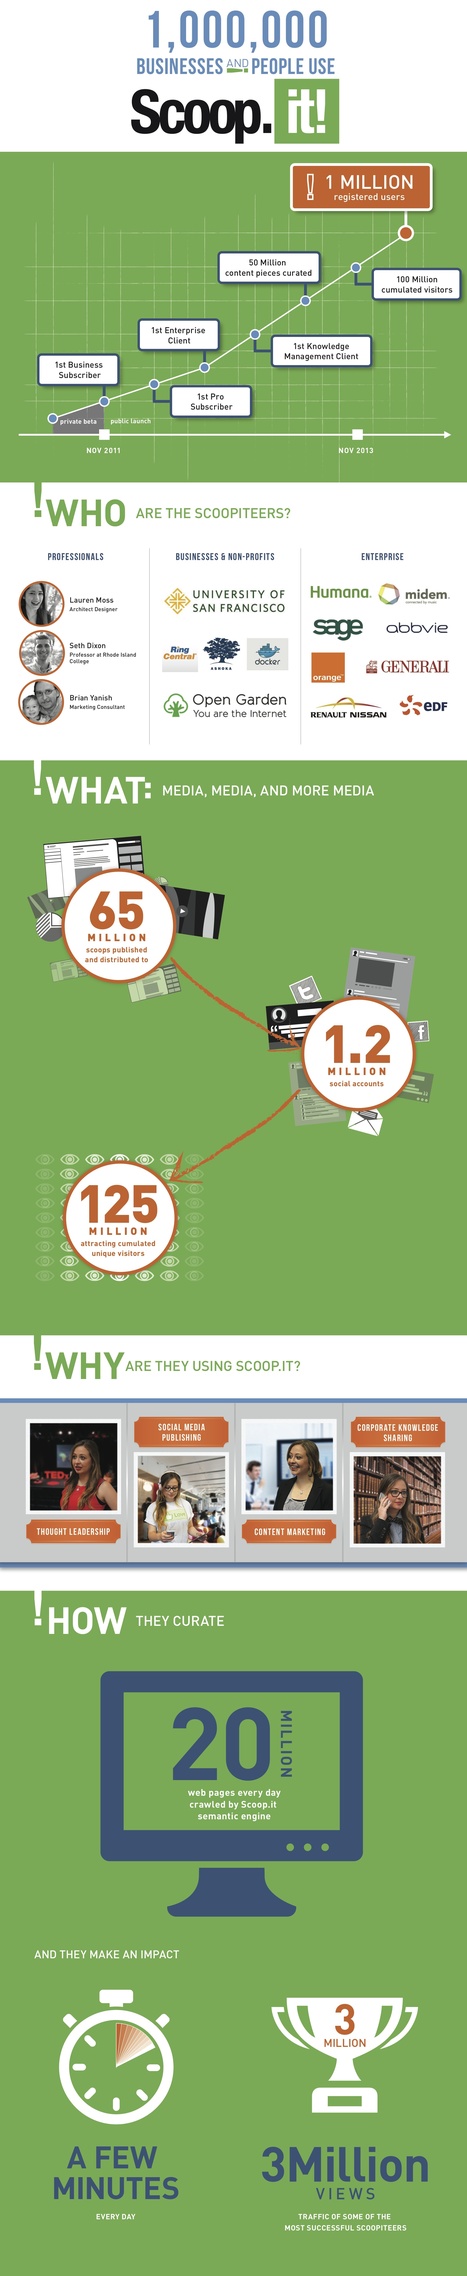 Curation: 1,000,000 people and businesses are now using Scoop.it! [Infographic] | Ukr-Content-Curator | Scoop.it